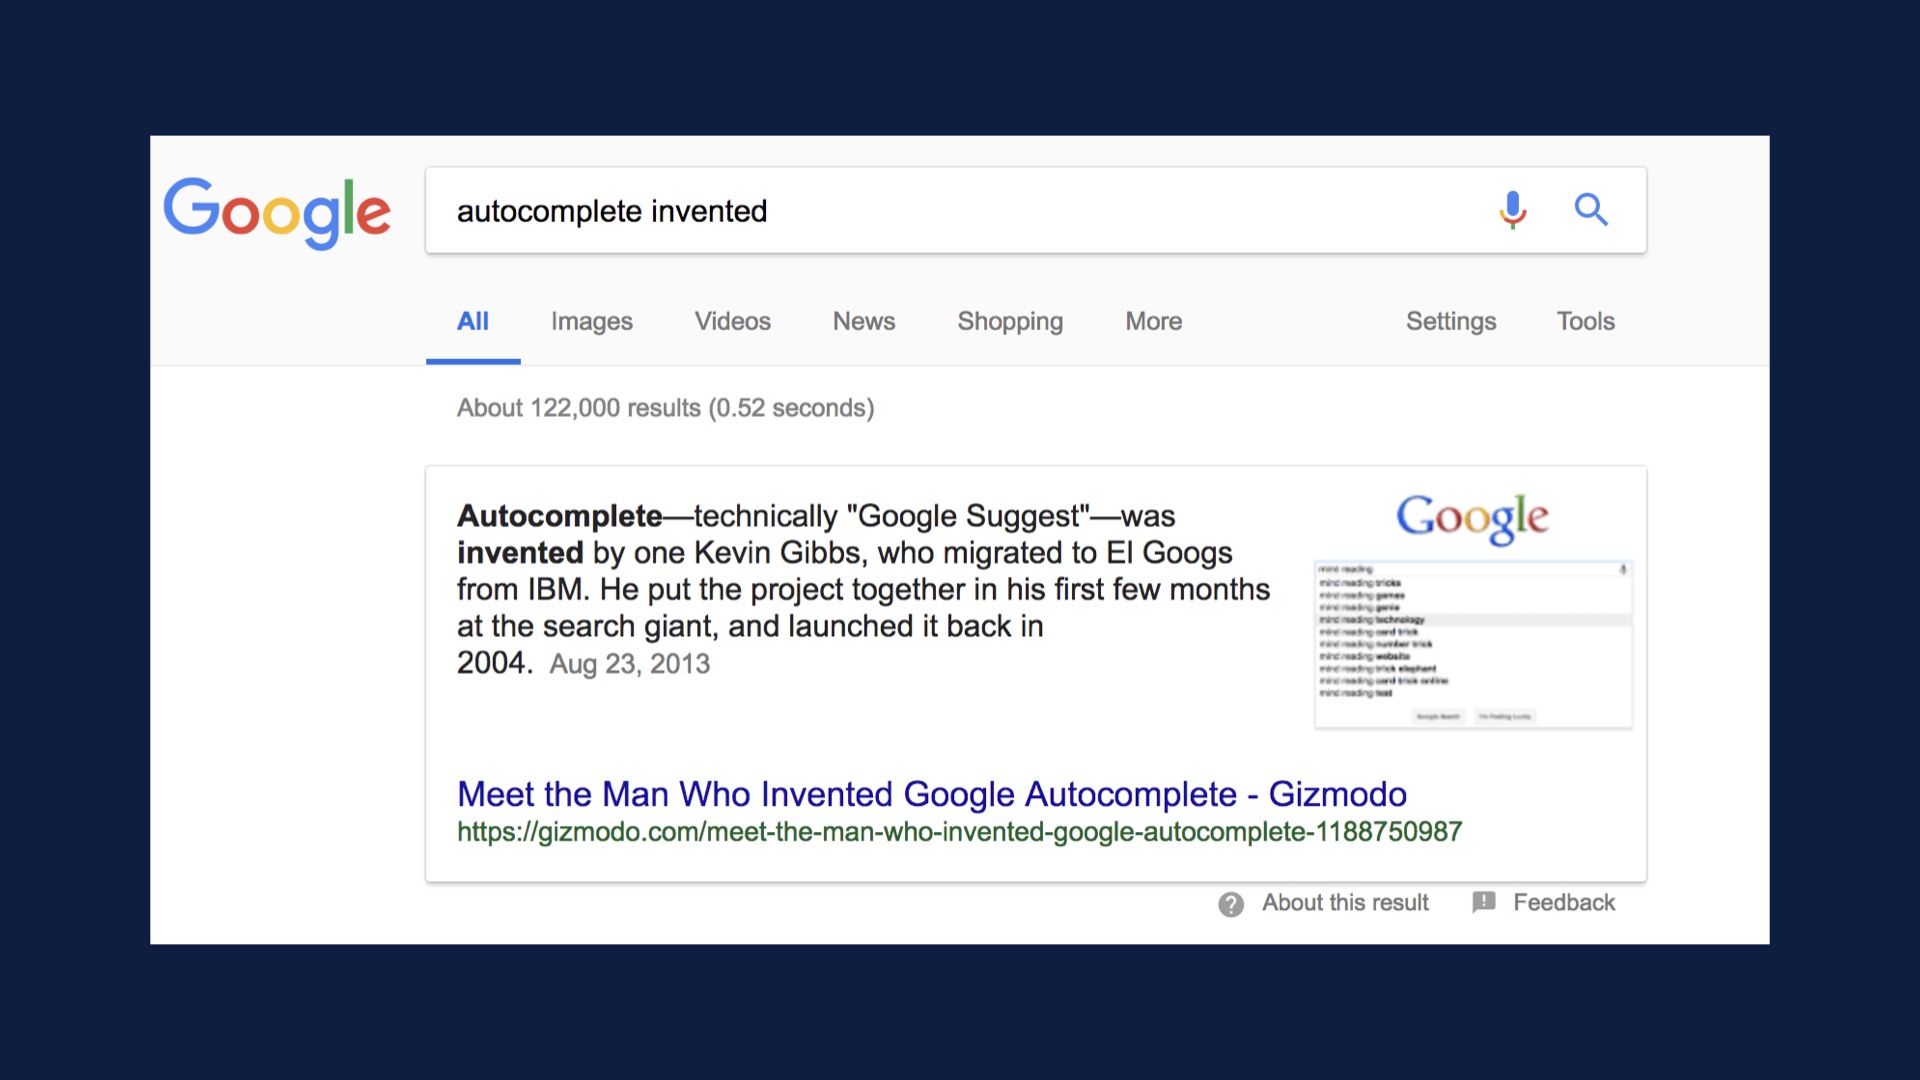 Slide image: Google search result for autocomplete invented